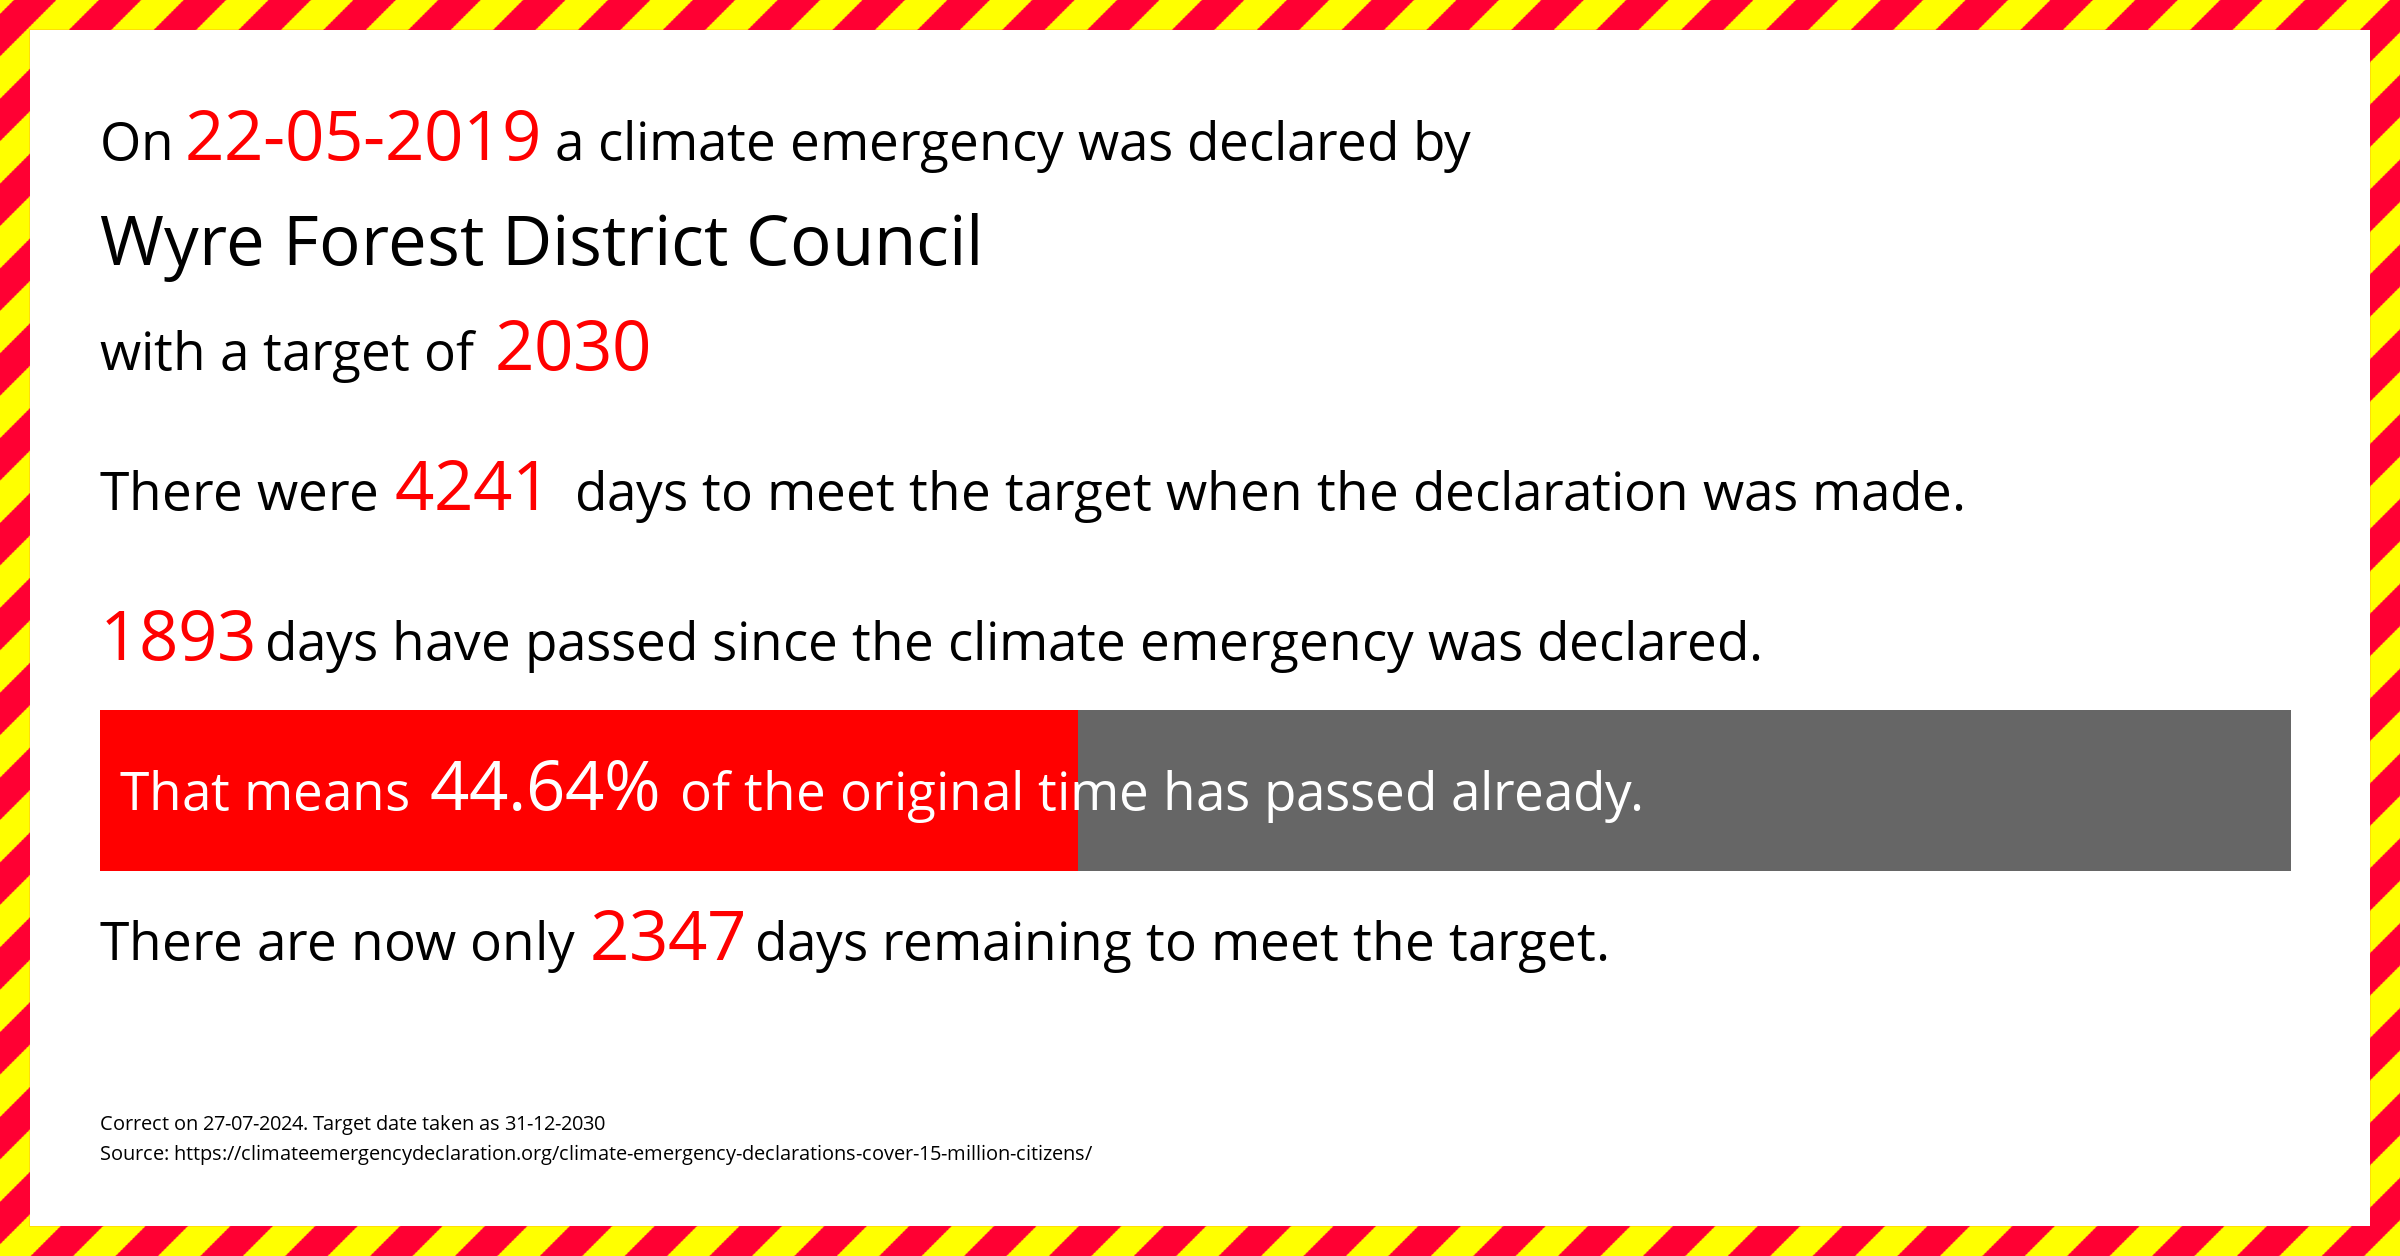 Wyre Forest District Council declared a Climate emergency on Wednesday 22nd May 2019, with a target of 2030.